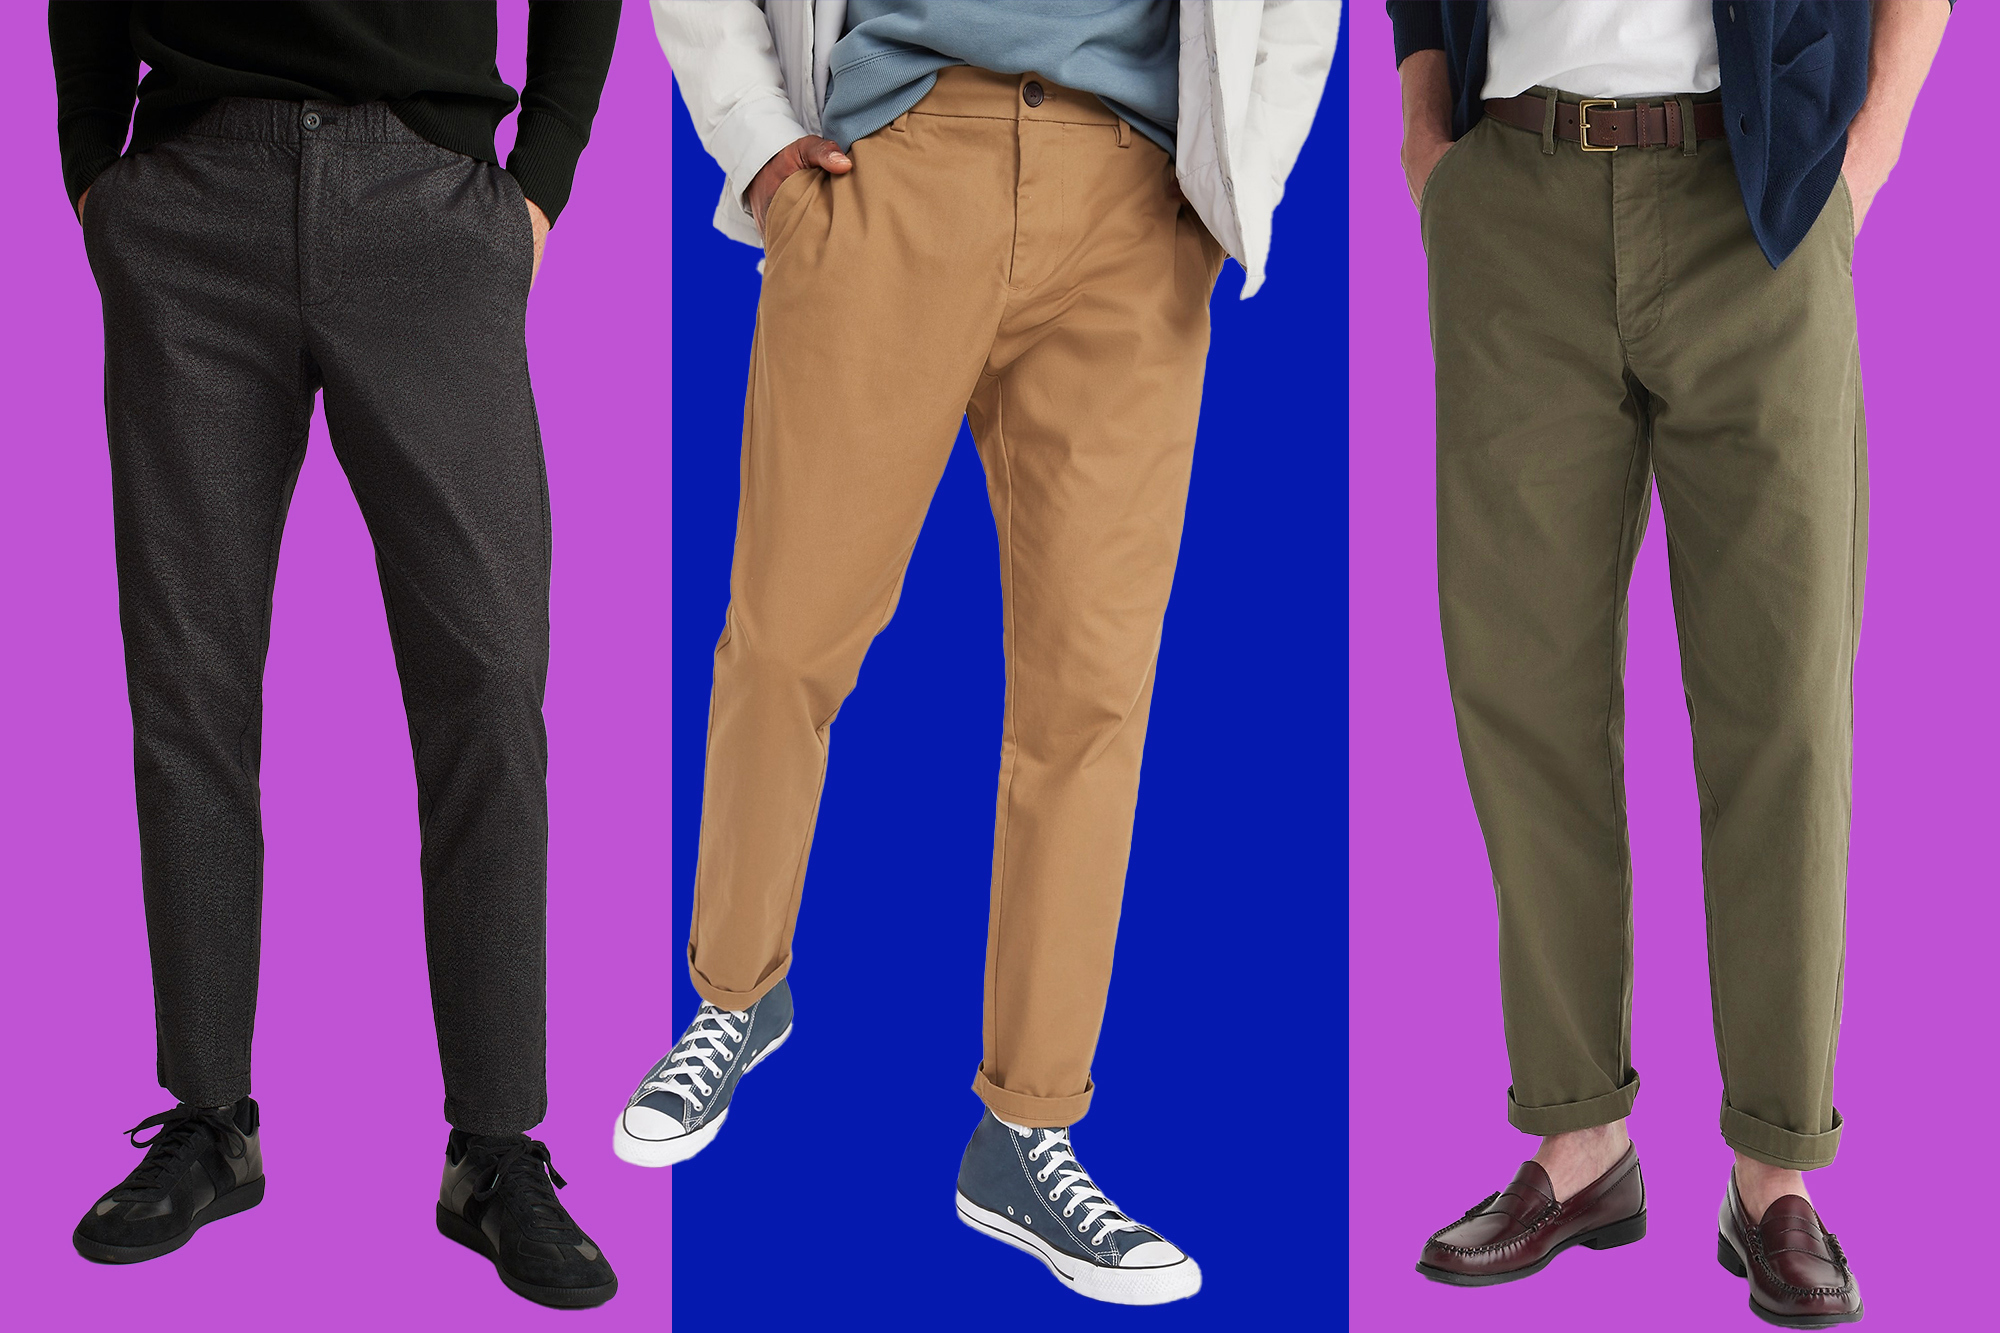 Best chino pants for men in 2023: 10 options for every style and budget